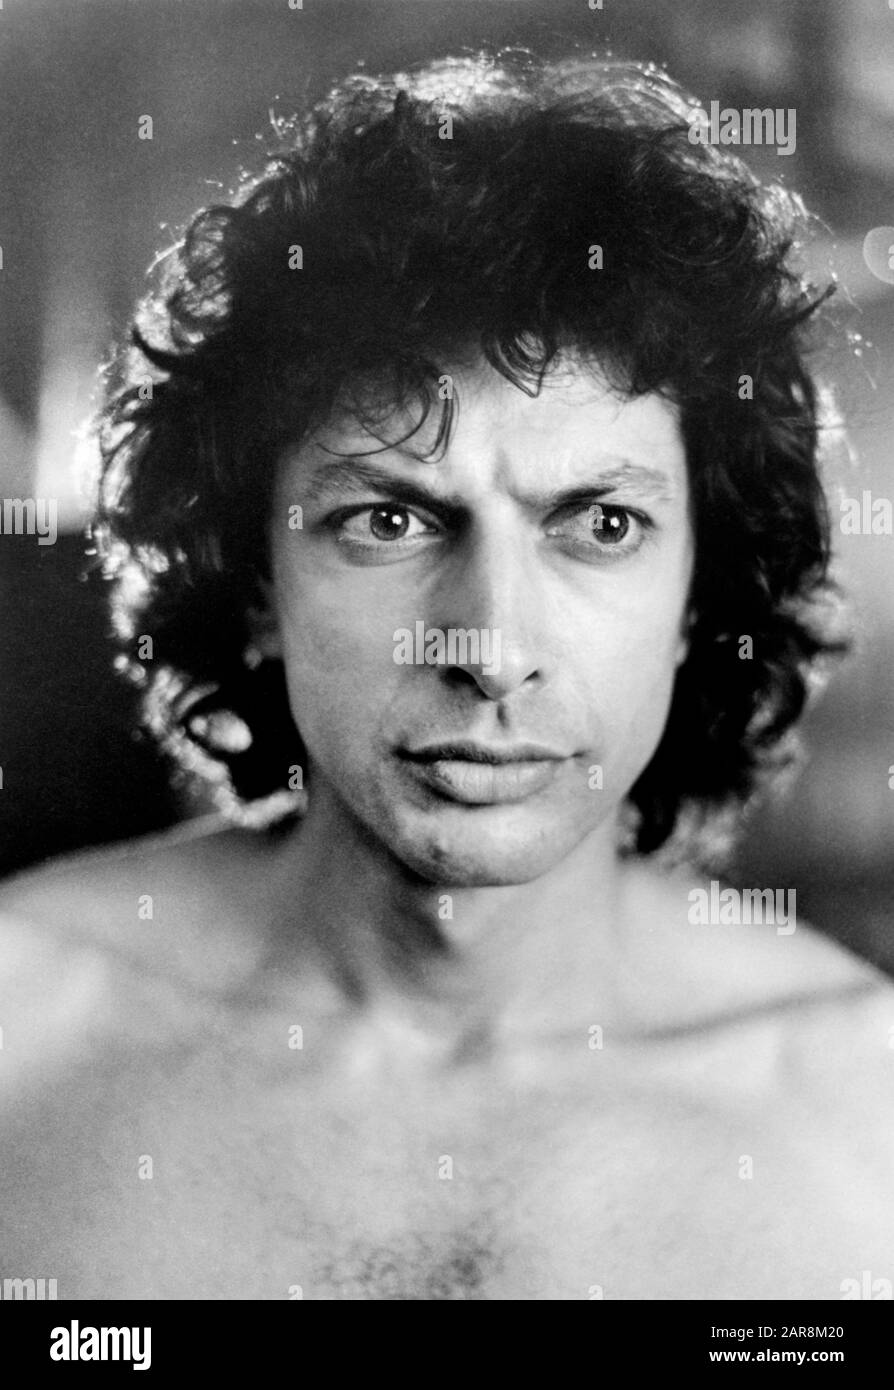 Jeff Goldblum, Head and Shoulders Publicity Portrait from the Film, 'The Fly', Photo by Attila Dory, 20th Century-Fox, 1986 Stock Photo